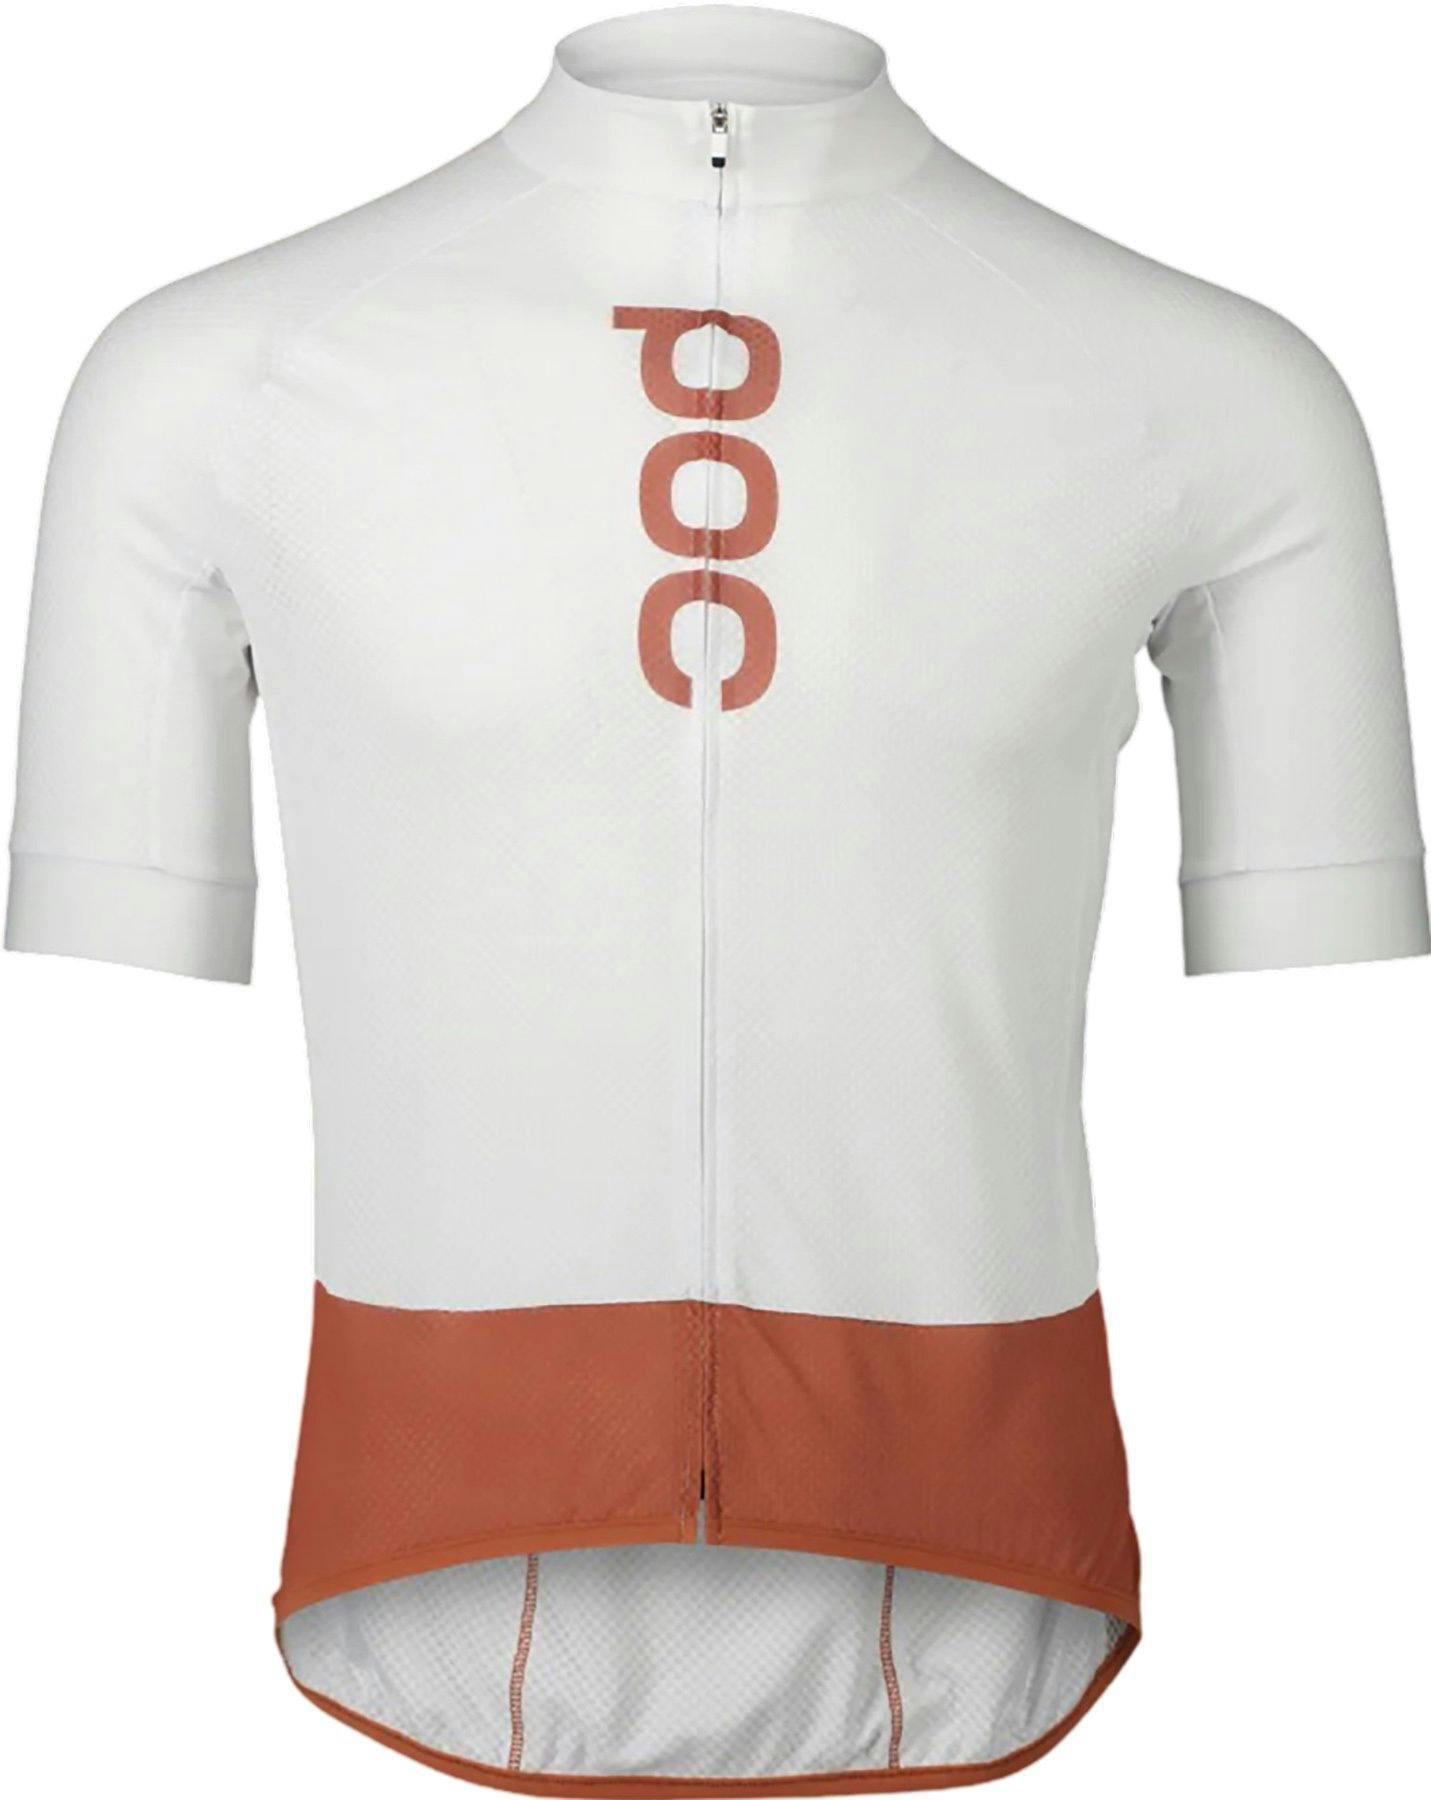 Product image for Essential Road Logo Jersey - Men's